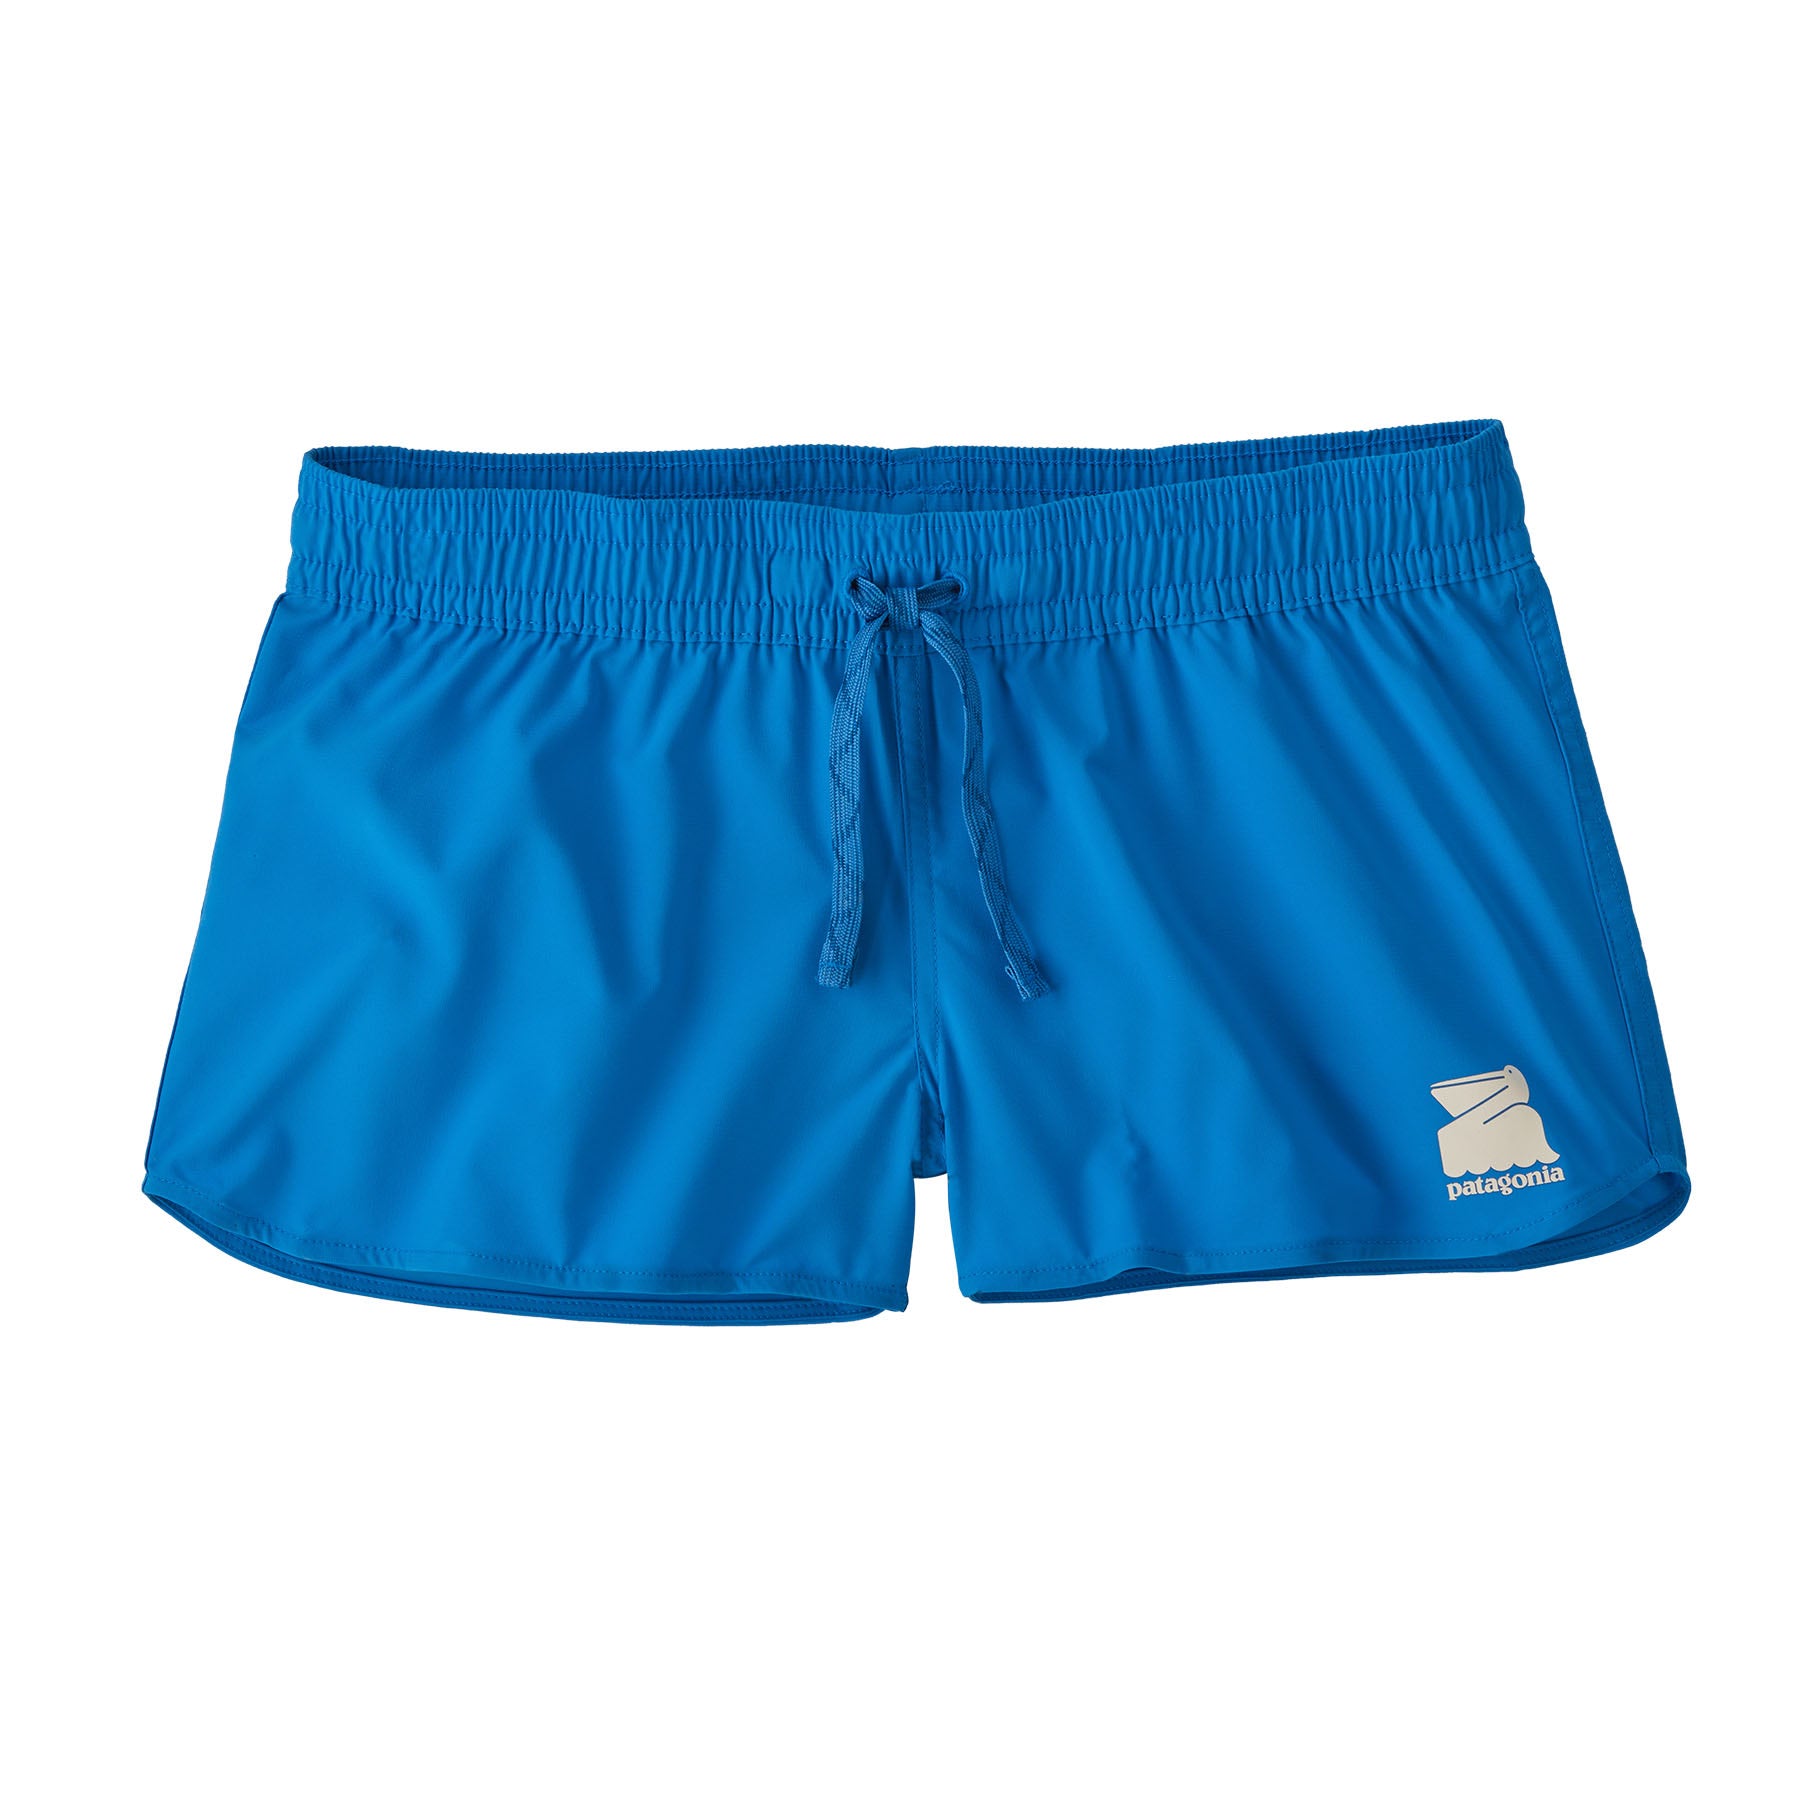 Women's Stretch Planing Micro Shorts - 2 in.